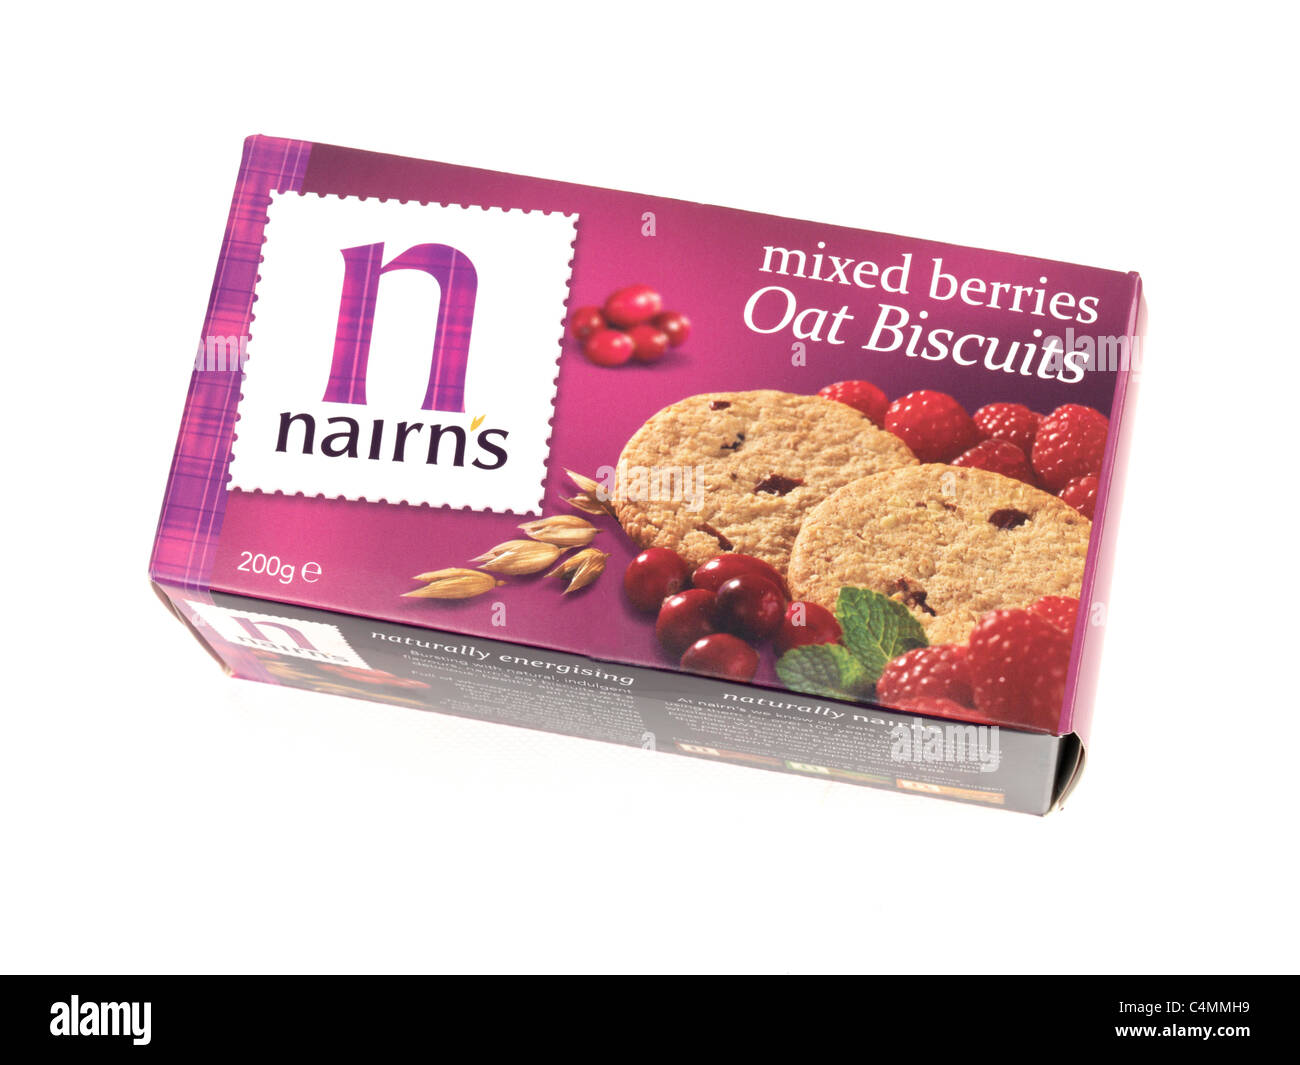 Nairn's Mixed Berries Oat Biscuits Stock Photo